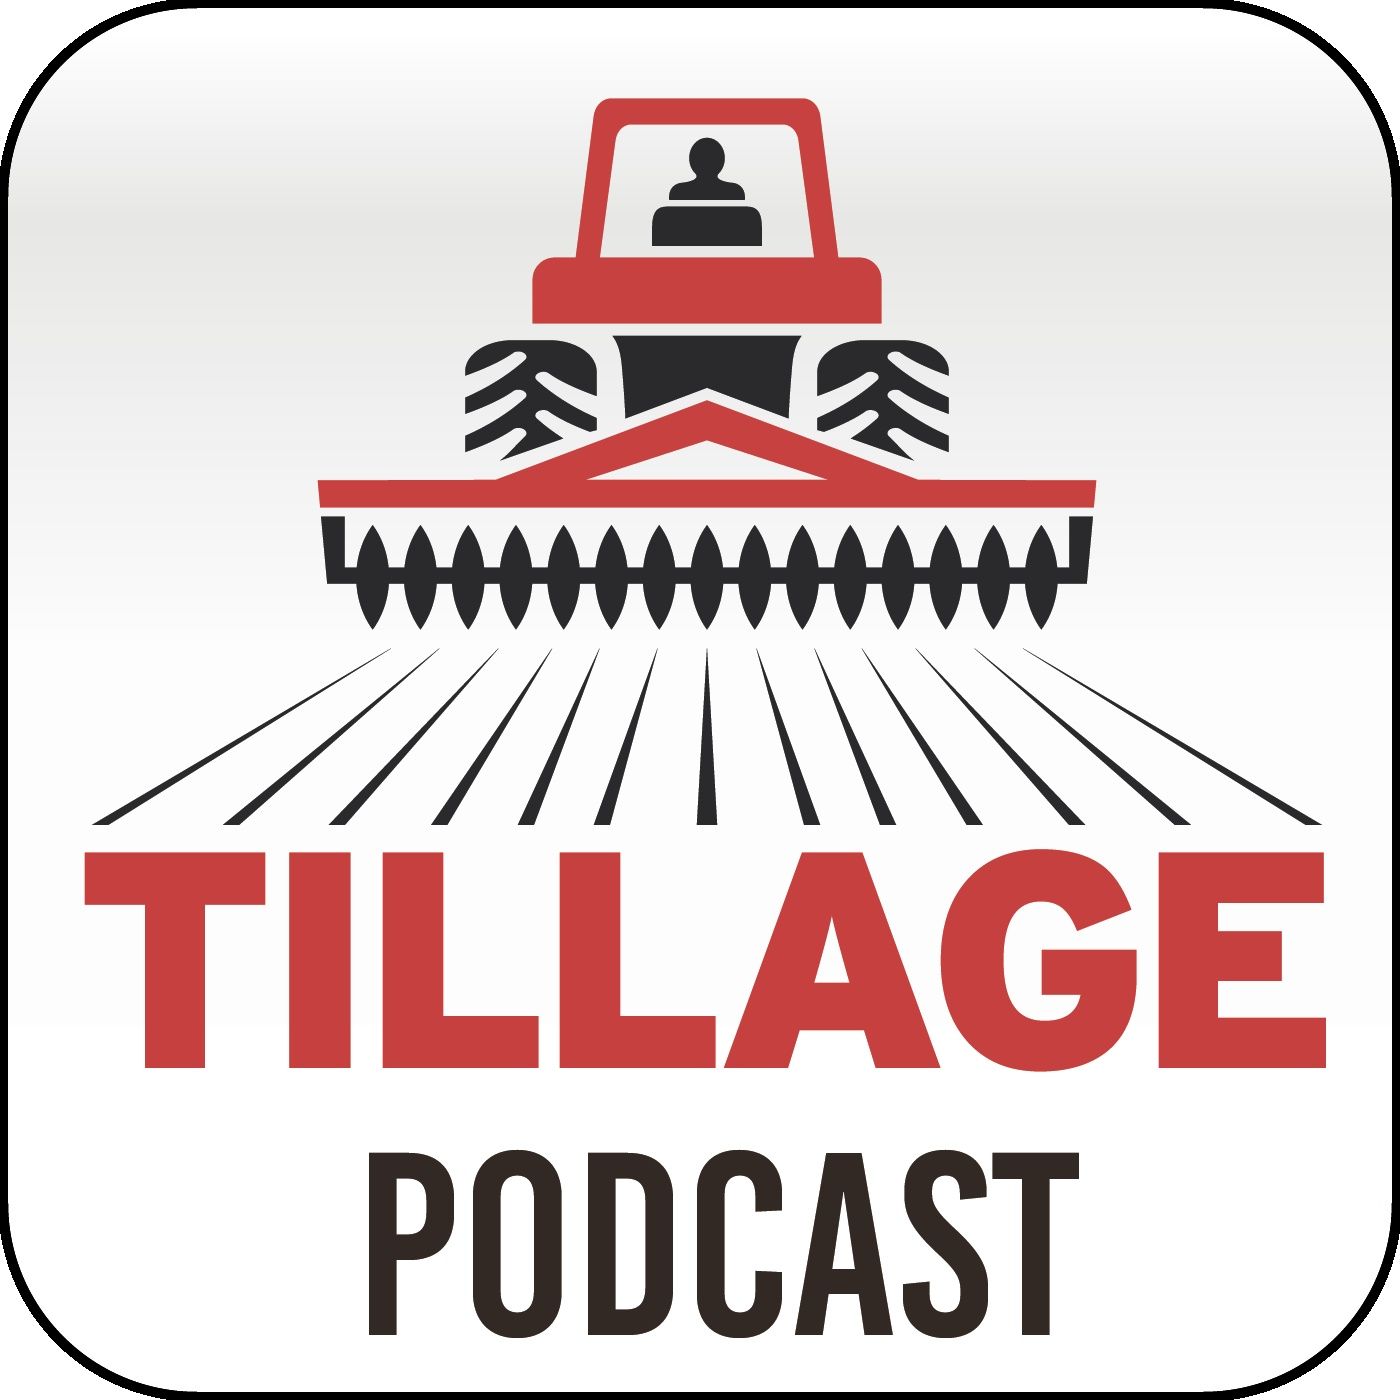 Ep 971: The Tillage Podcast - Losing land, stubbles, birds and malt expansion